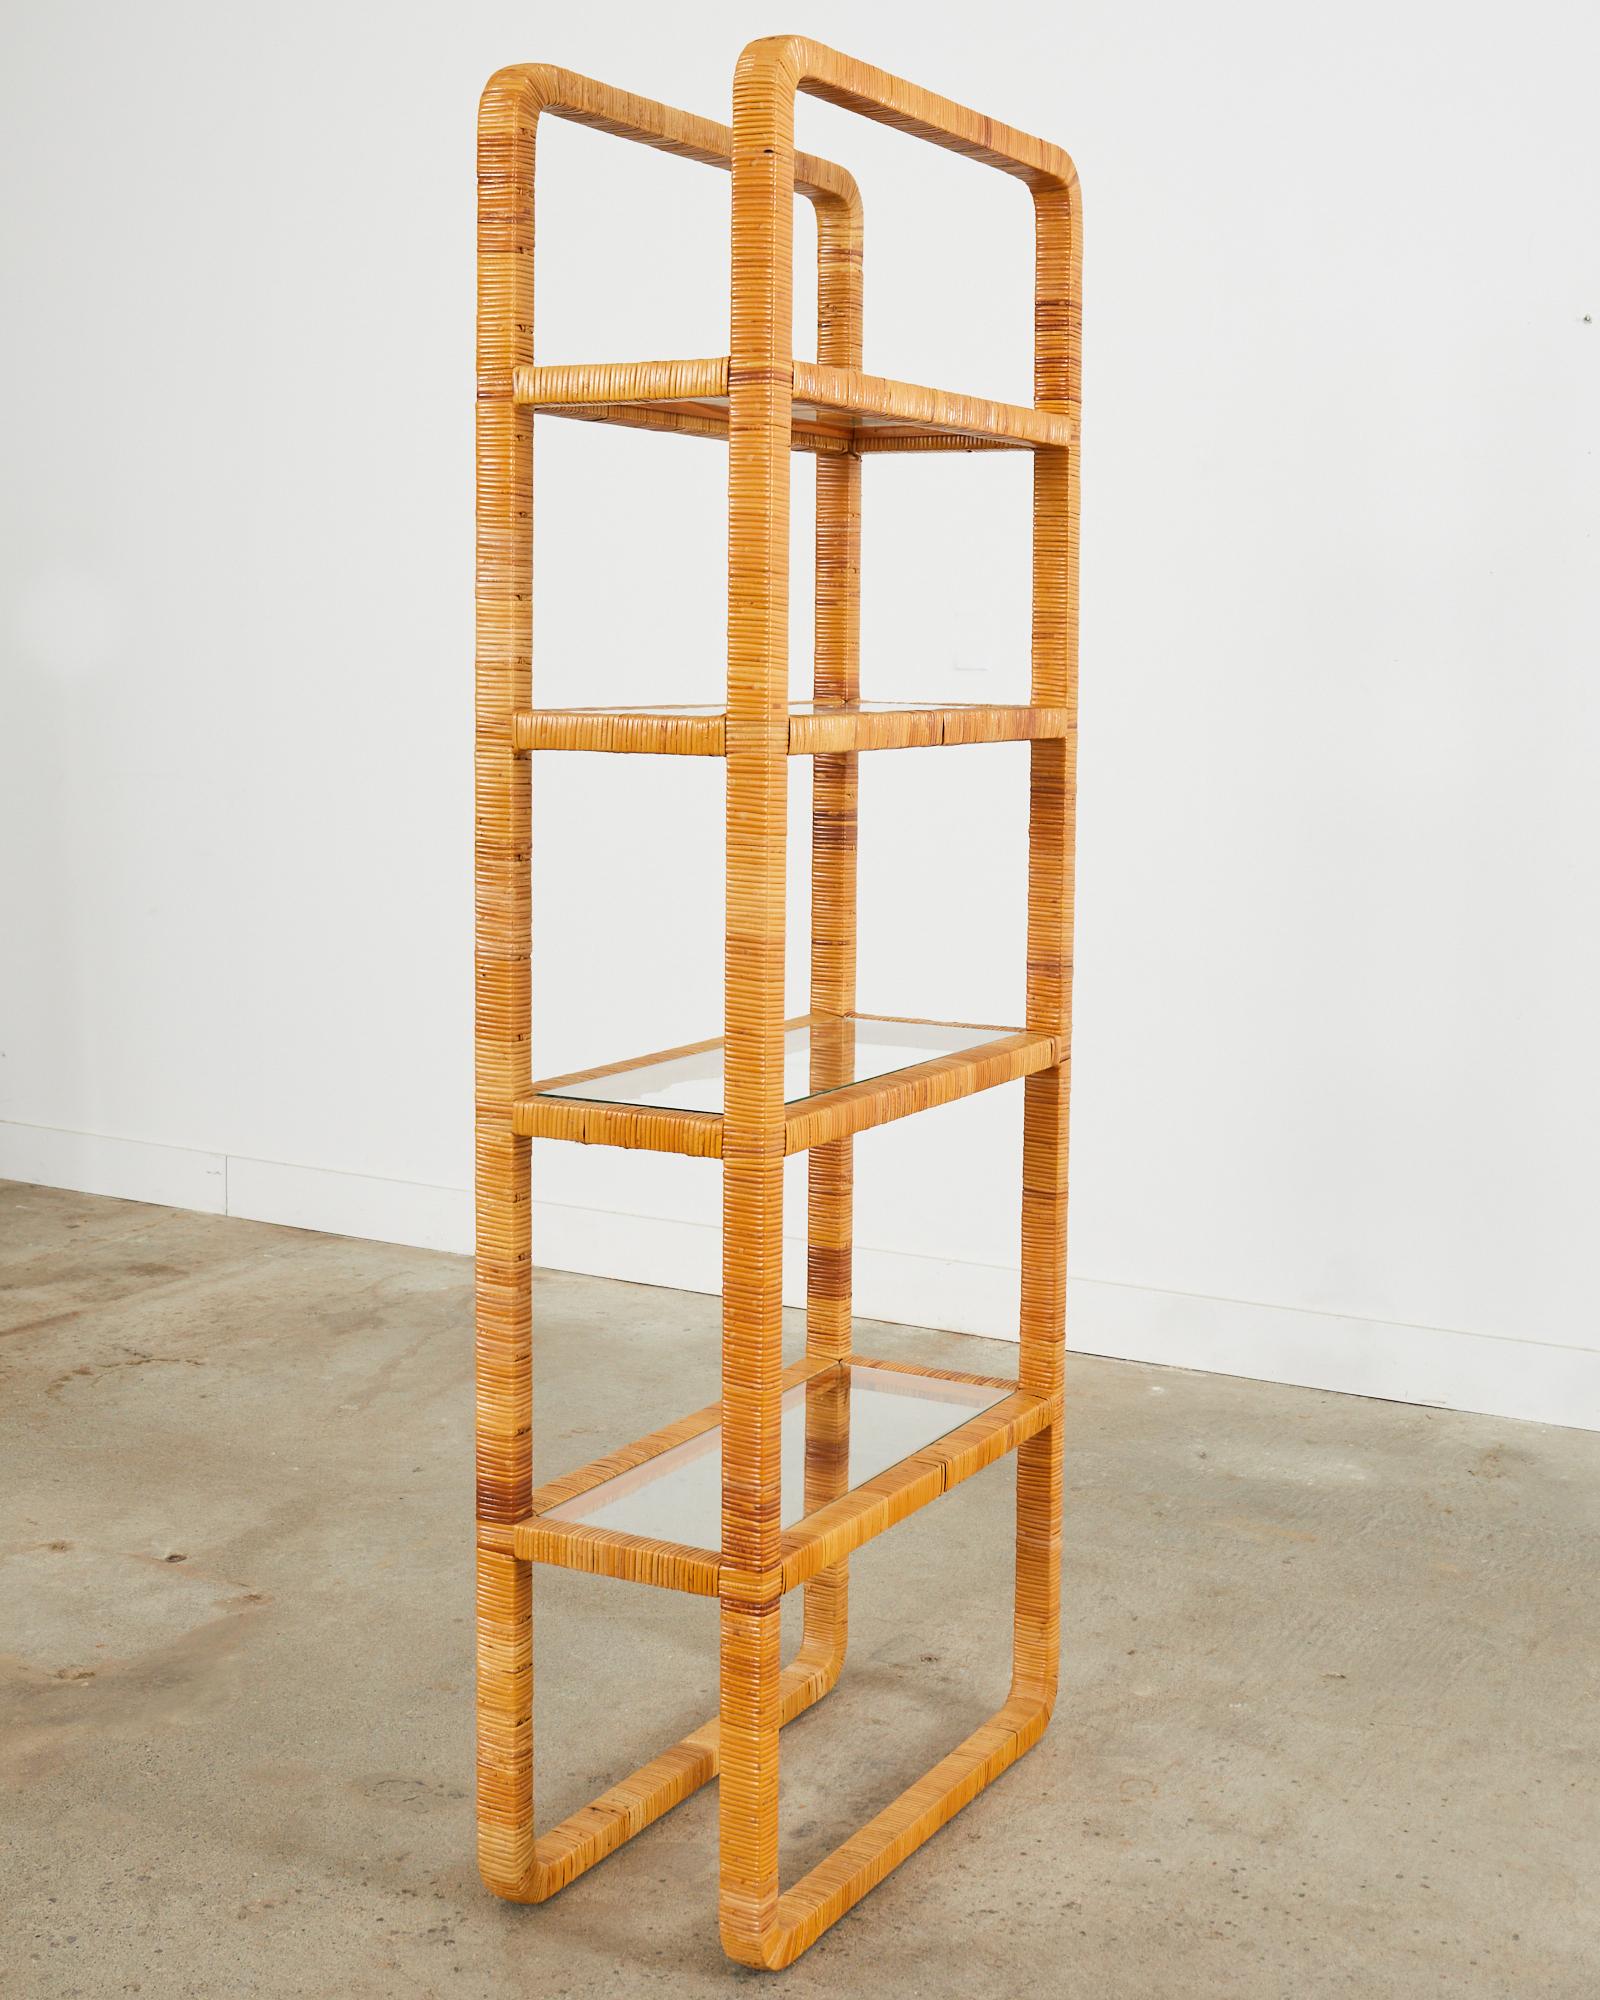 Stylish Mid-Century Modern four-shelf etagere or bookcase featuring a rattan wrapped frame made in the manner and style of Bielecky Brothers with gracefully curved corners. The shelves are inset of flush mounted with fitted glass shelves. The